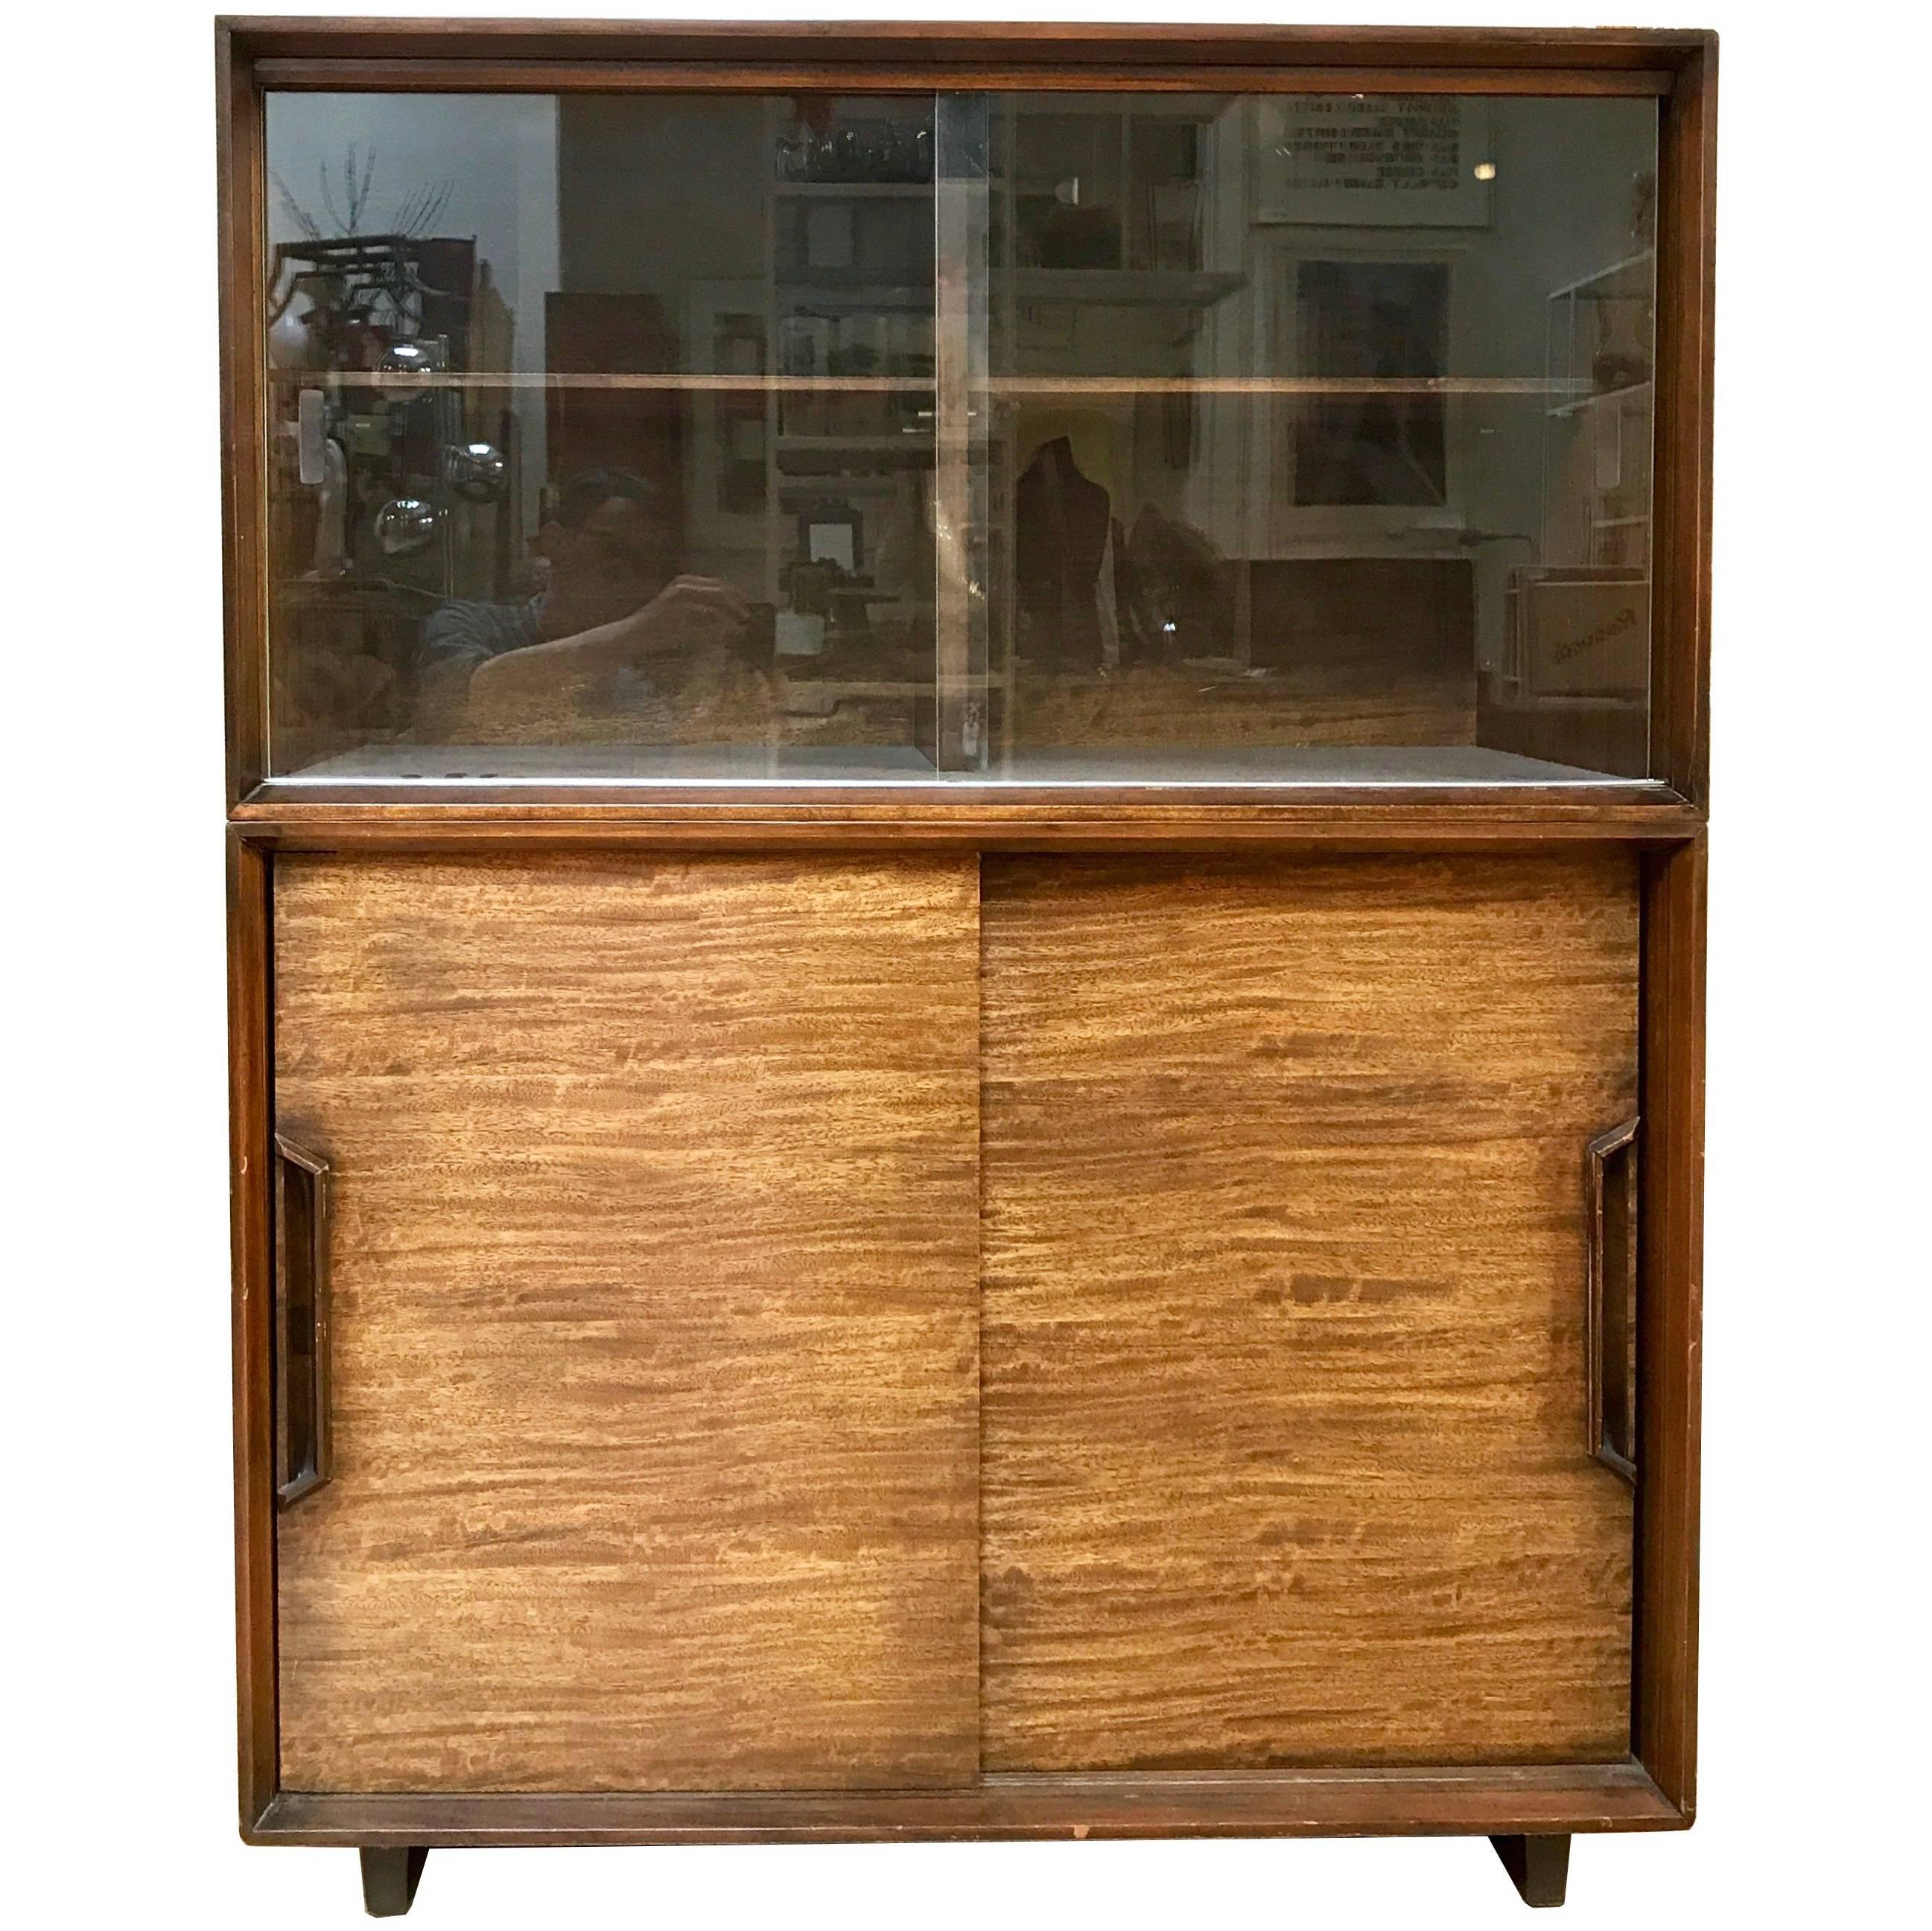 1950s Milo Baughman for Drexel Perspective Mindoro Wood China Hutch For Sale